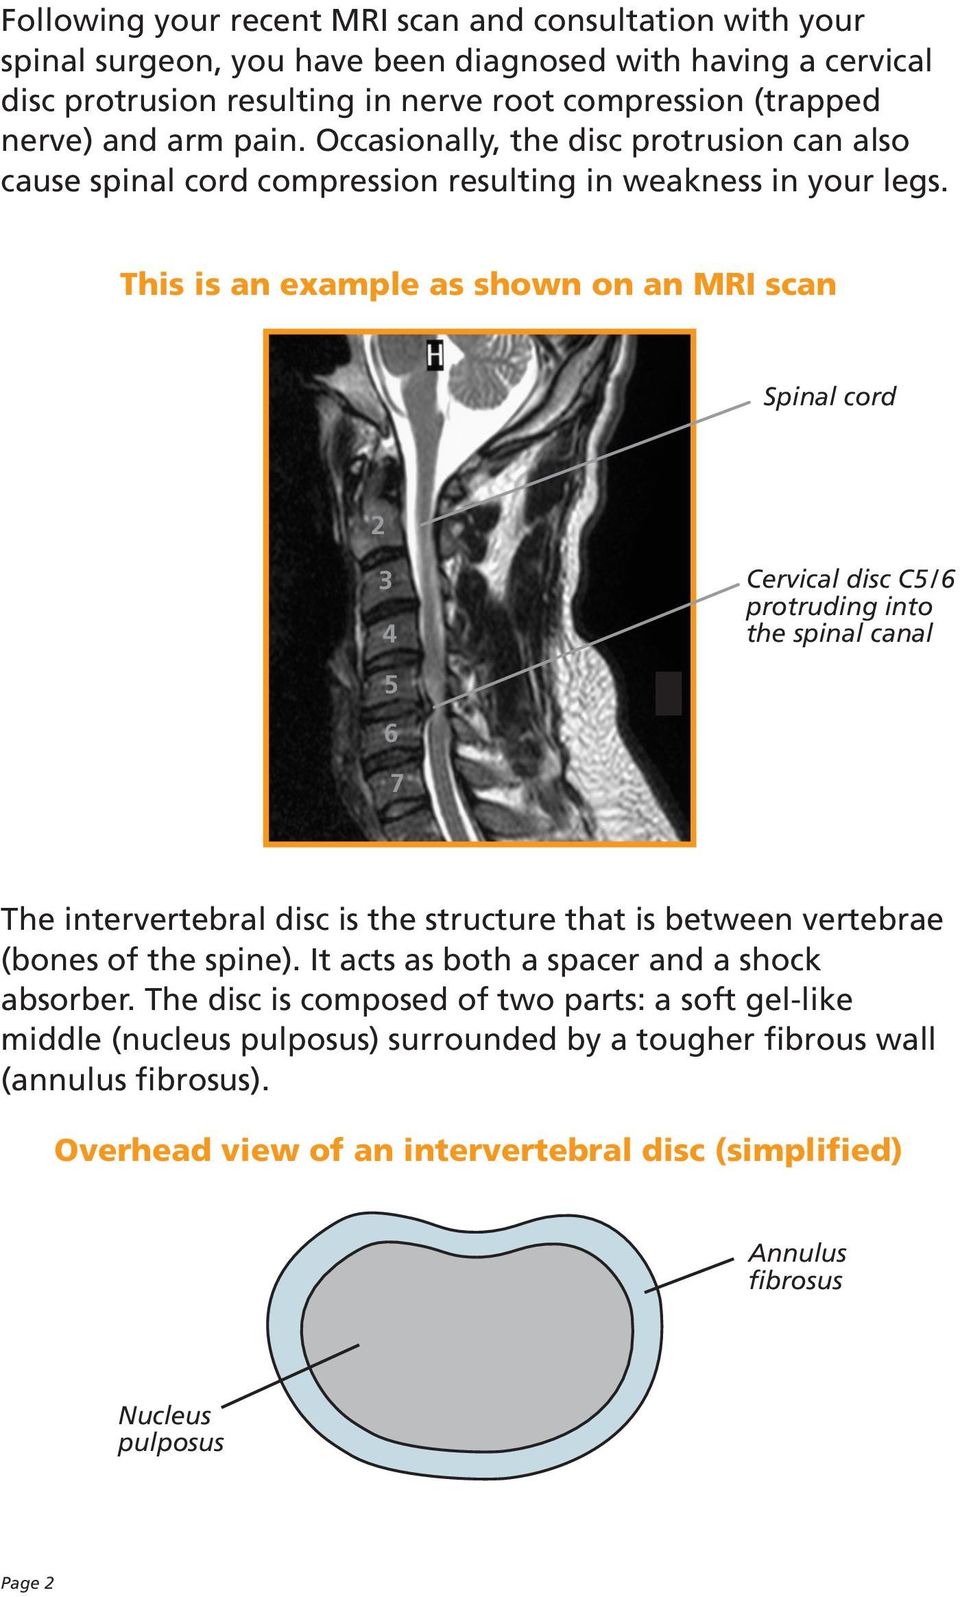 This is an example as shown on an MRI scan Spinal cord 2 3 4 Cervical disc C5 / 6 protruding into the spinal canal 5 6 7 The intervertebral disc is the structure that is between vertebrae (bones of